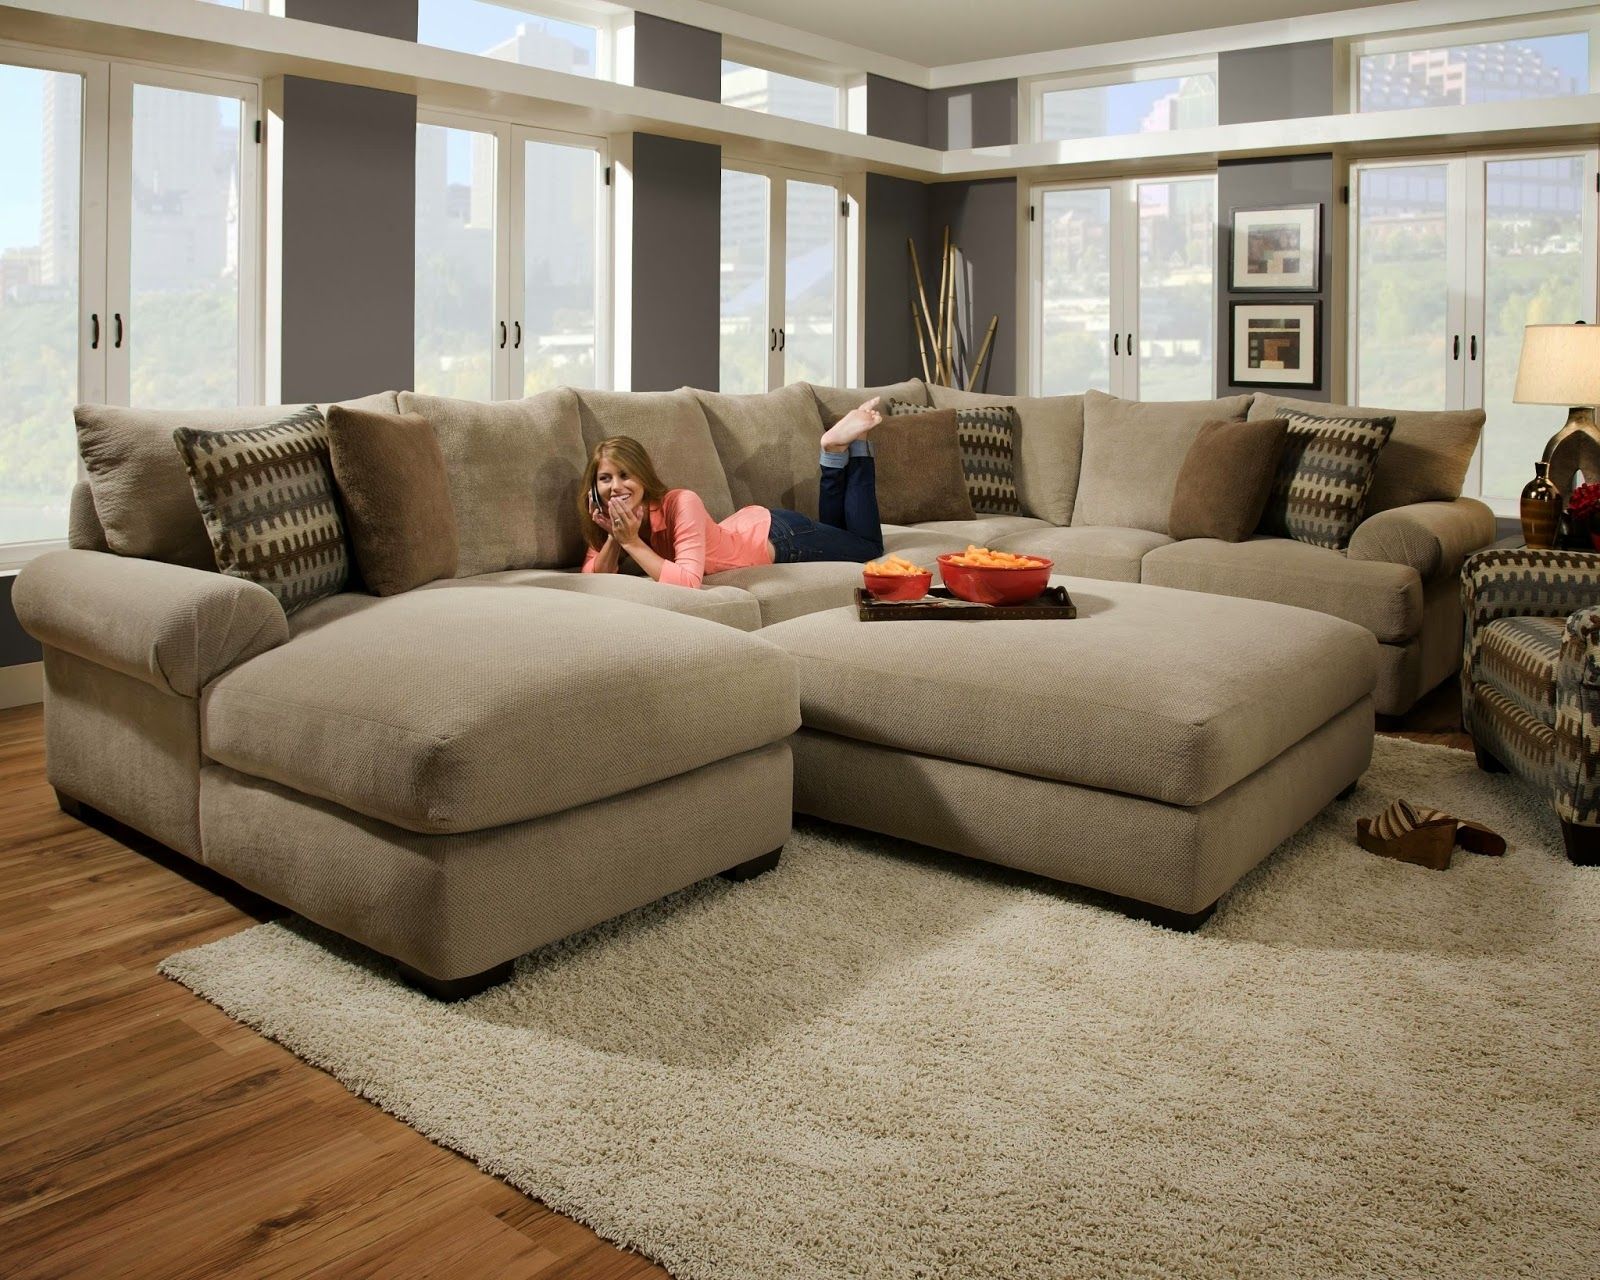 Sectional Sofa With Ottoman – Foter In Sofas With Ottomans In Brown (View 5 of 15)